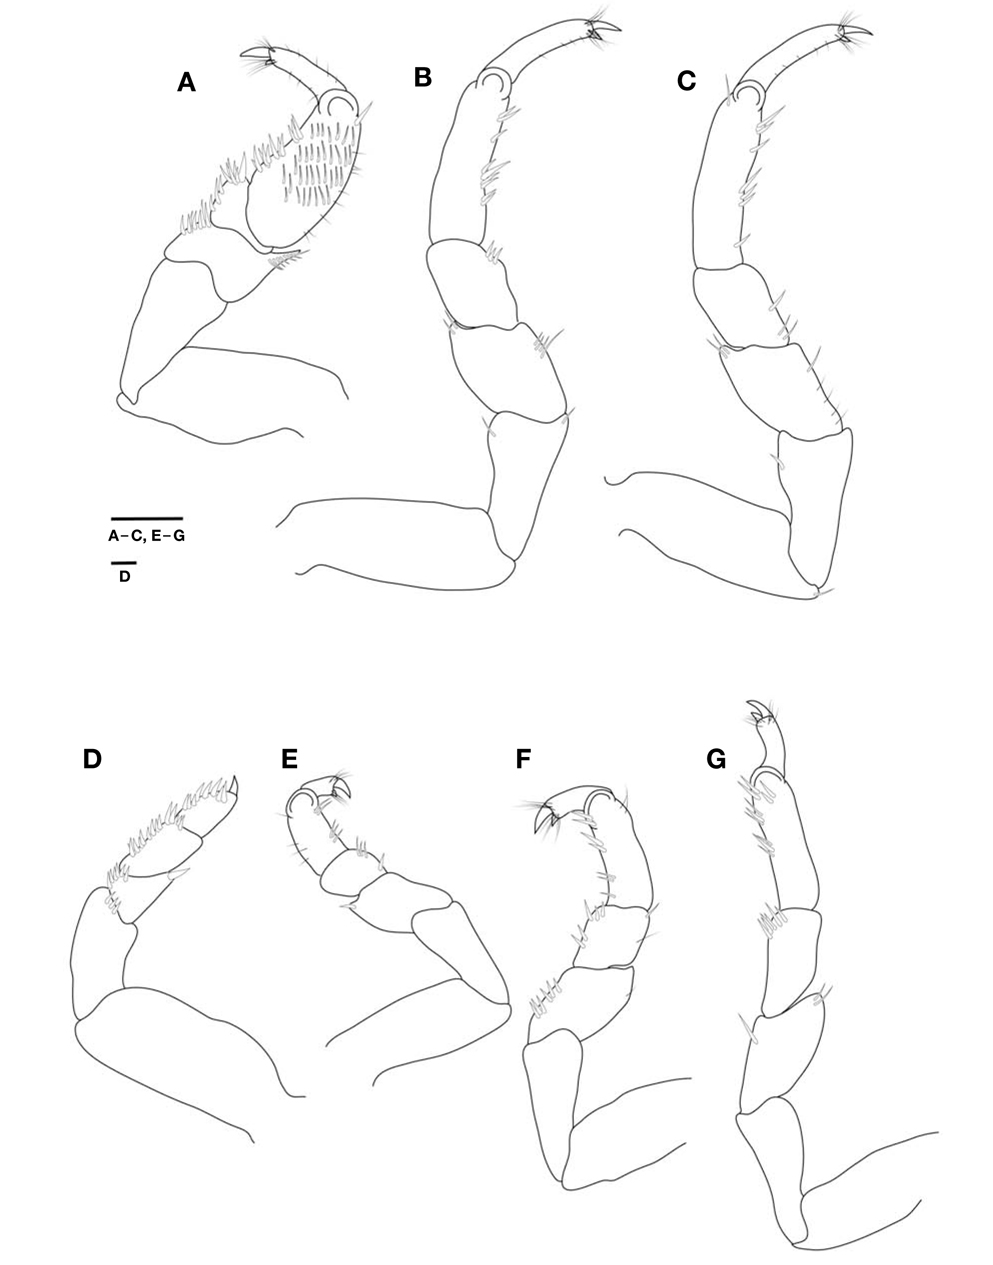 Cleantioides planicauda, male. A, Pereopod 1; B, Pereopod 2; C, Pereopod 3; D, Pereopod 4; E, Pereopod 5; F, Pereopod 6; G, Pereopod 7. Scale bars: A-C, E-G=0.2 mm, D=0.1 mm.